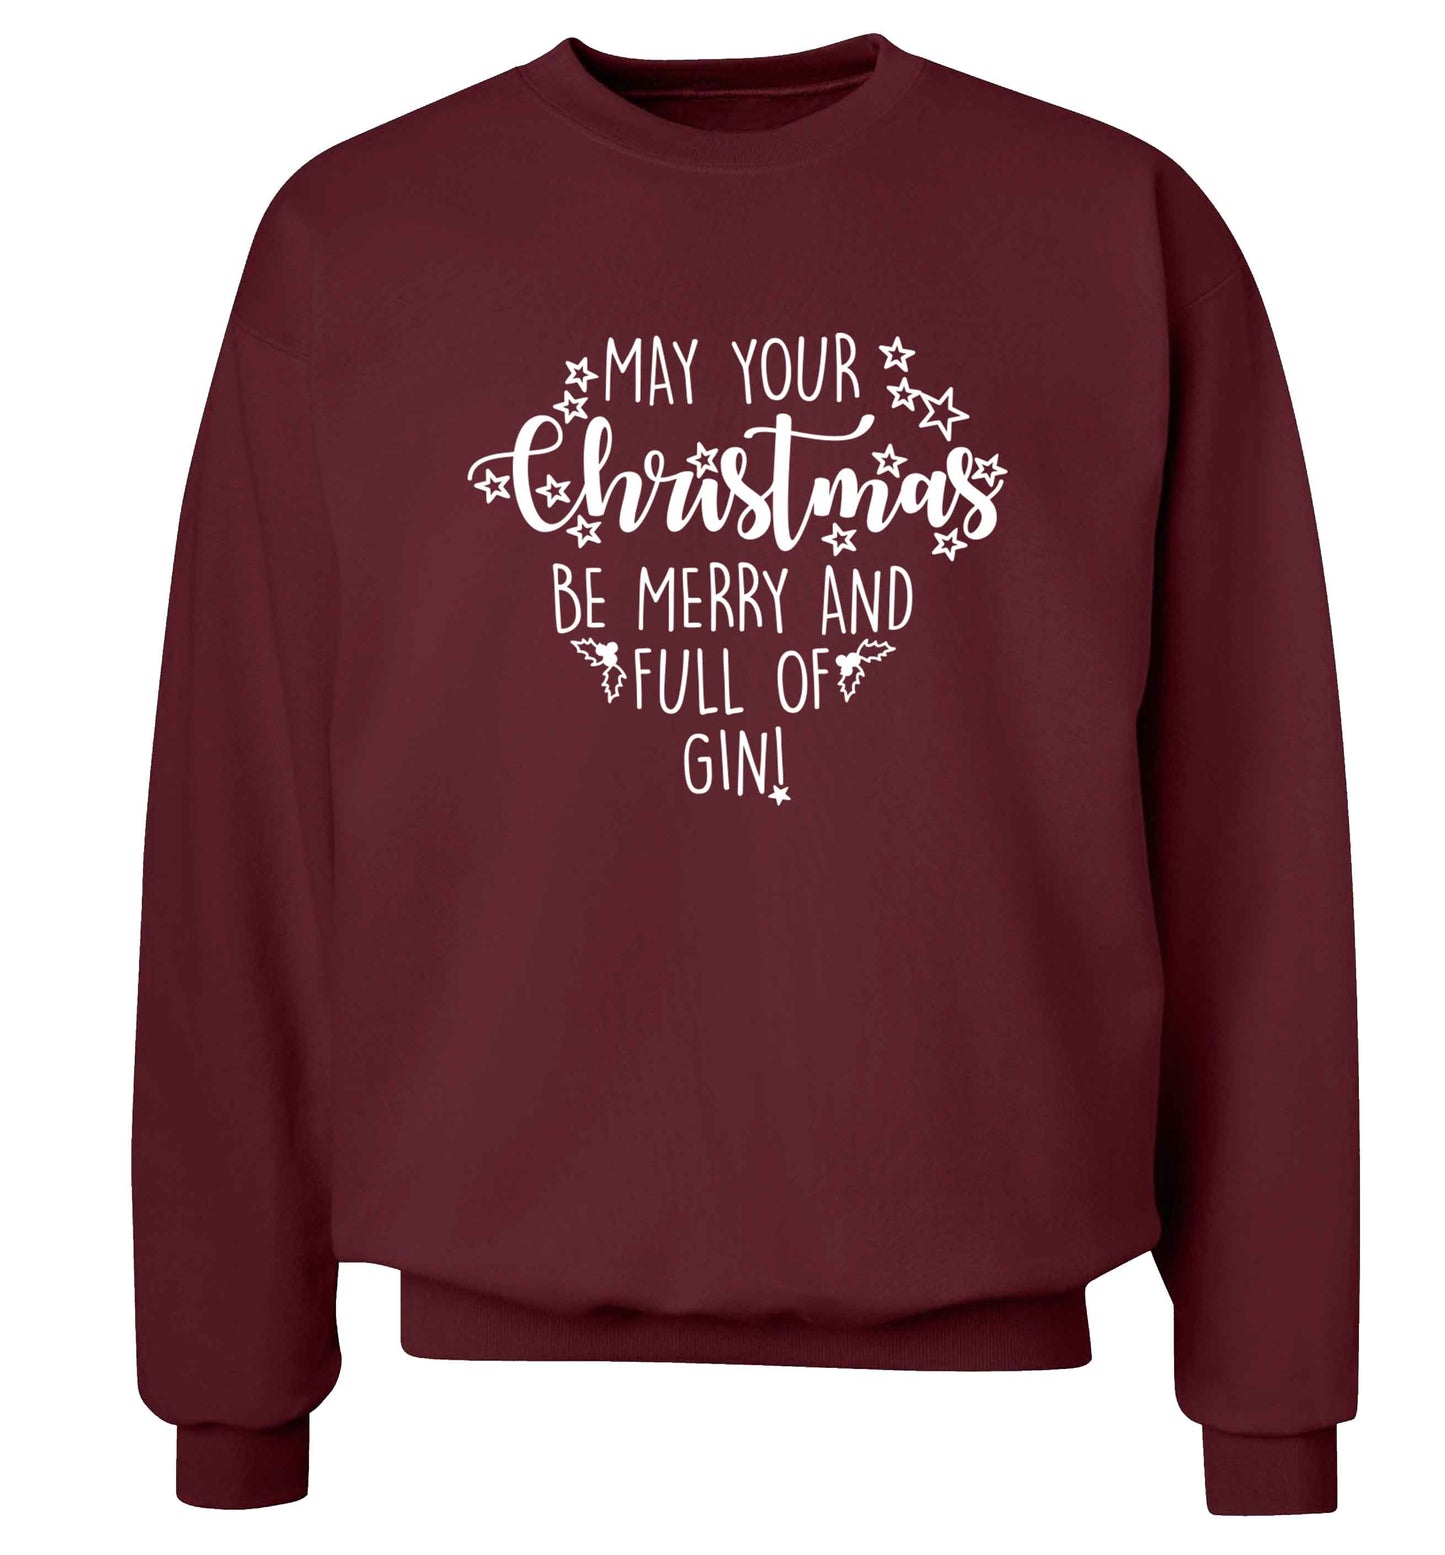 May your Christmas be merry and full of gin Adult's unisex maroon Sweater 2XL